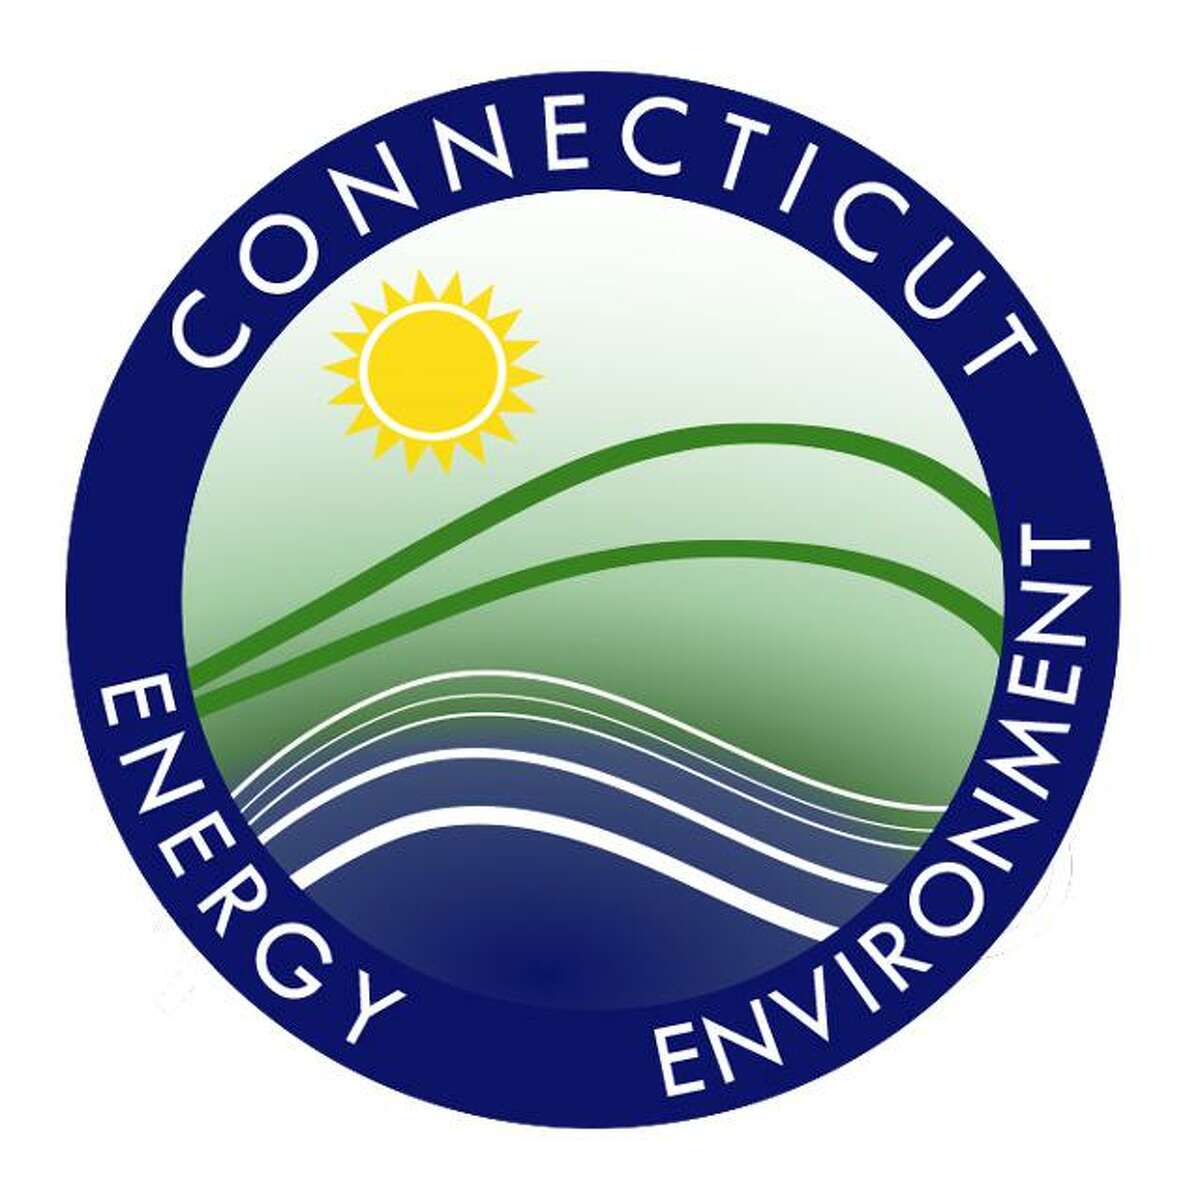 The logo of the Department of Energy and Environmental Protection.